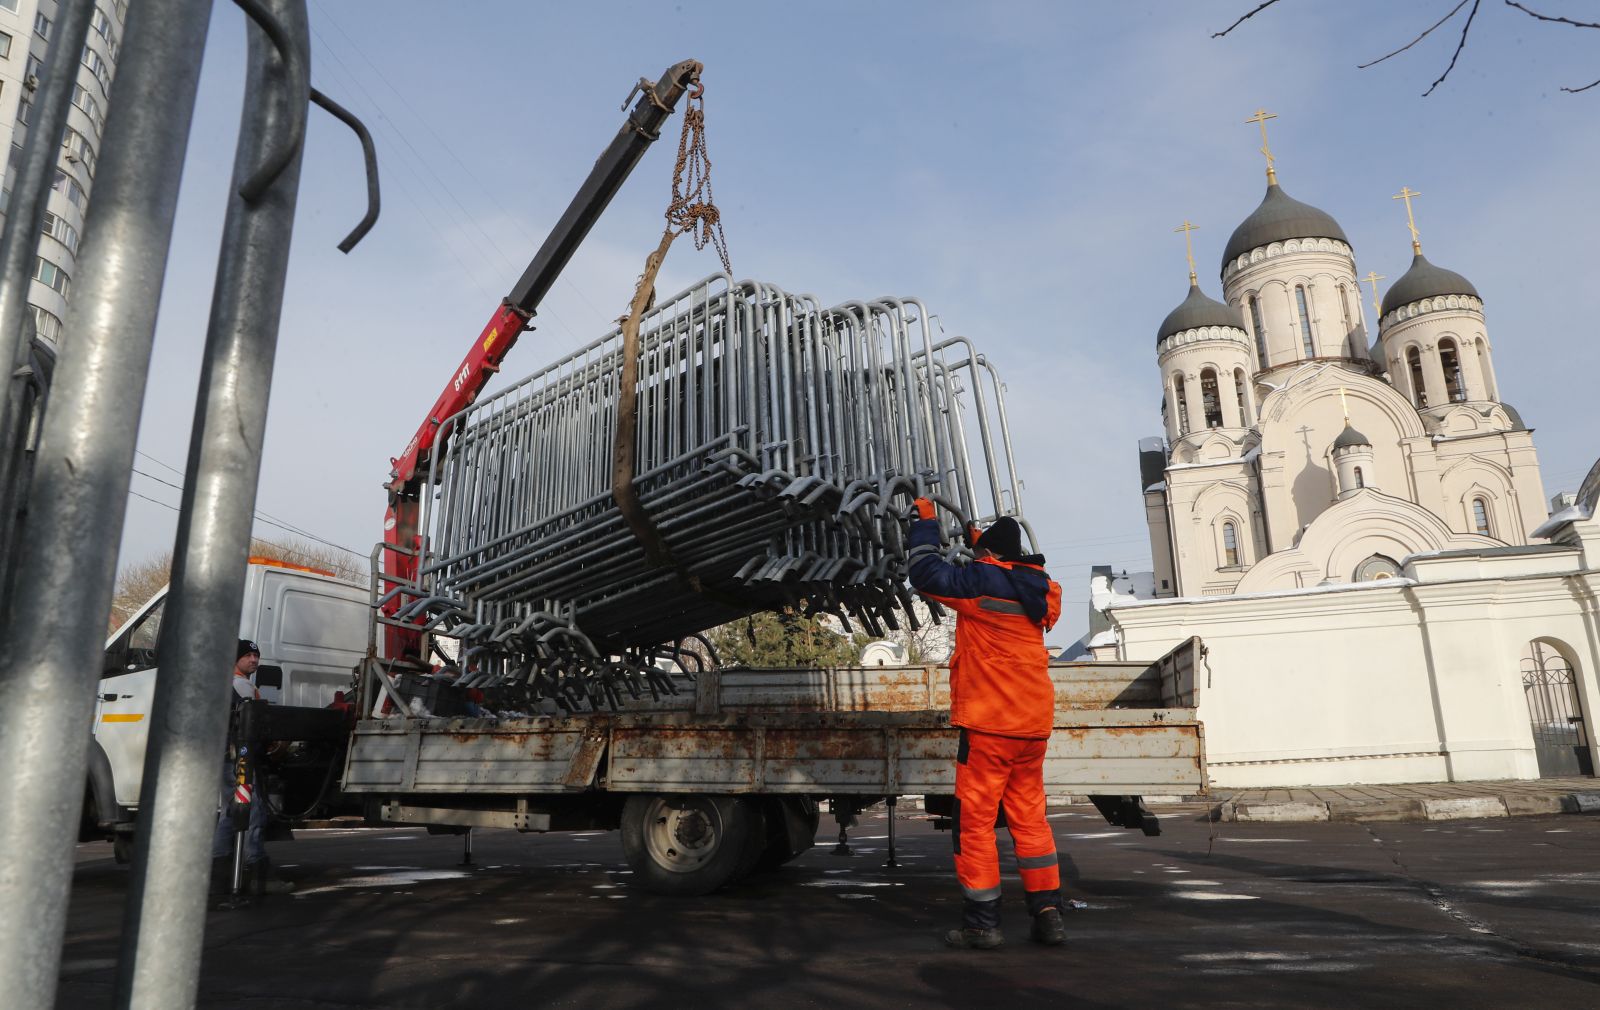 epa11188669 Municipal workers unload fences outside the Church of the Icon of the Mother of God, ahead of the upcoming funeral of late Russian opposition leader Alexei Navalny, in Moscow, Russia, 29 February 2024. Navalny’s funeral will be held at 14:00 local time on 01 March 2024, according to his press-secretary. Outspoken Kremlin critic Navalny died aged 47 in an arctic penal colony on 16 February 2024 after being transferred there in 2023. The colony is considered to be one of the world’s harshest prisons.  EPA/MAXIM SHIPENKOV